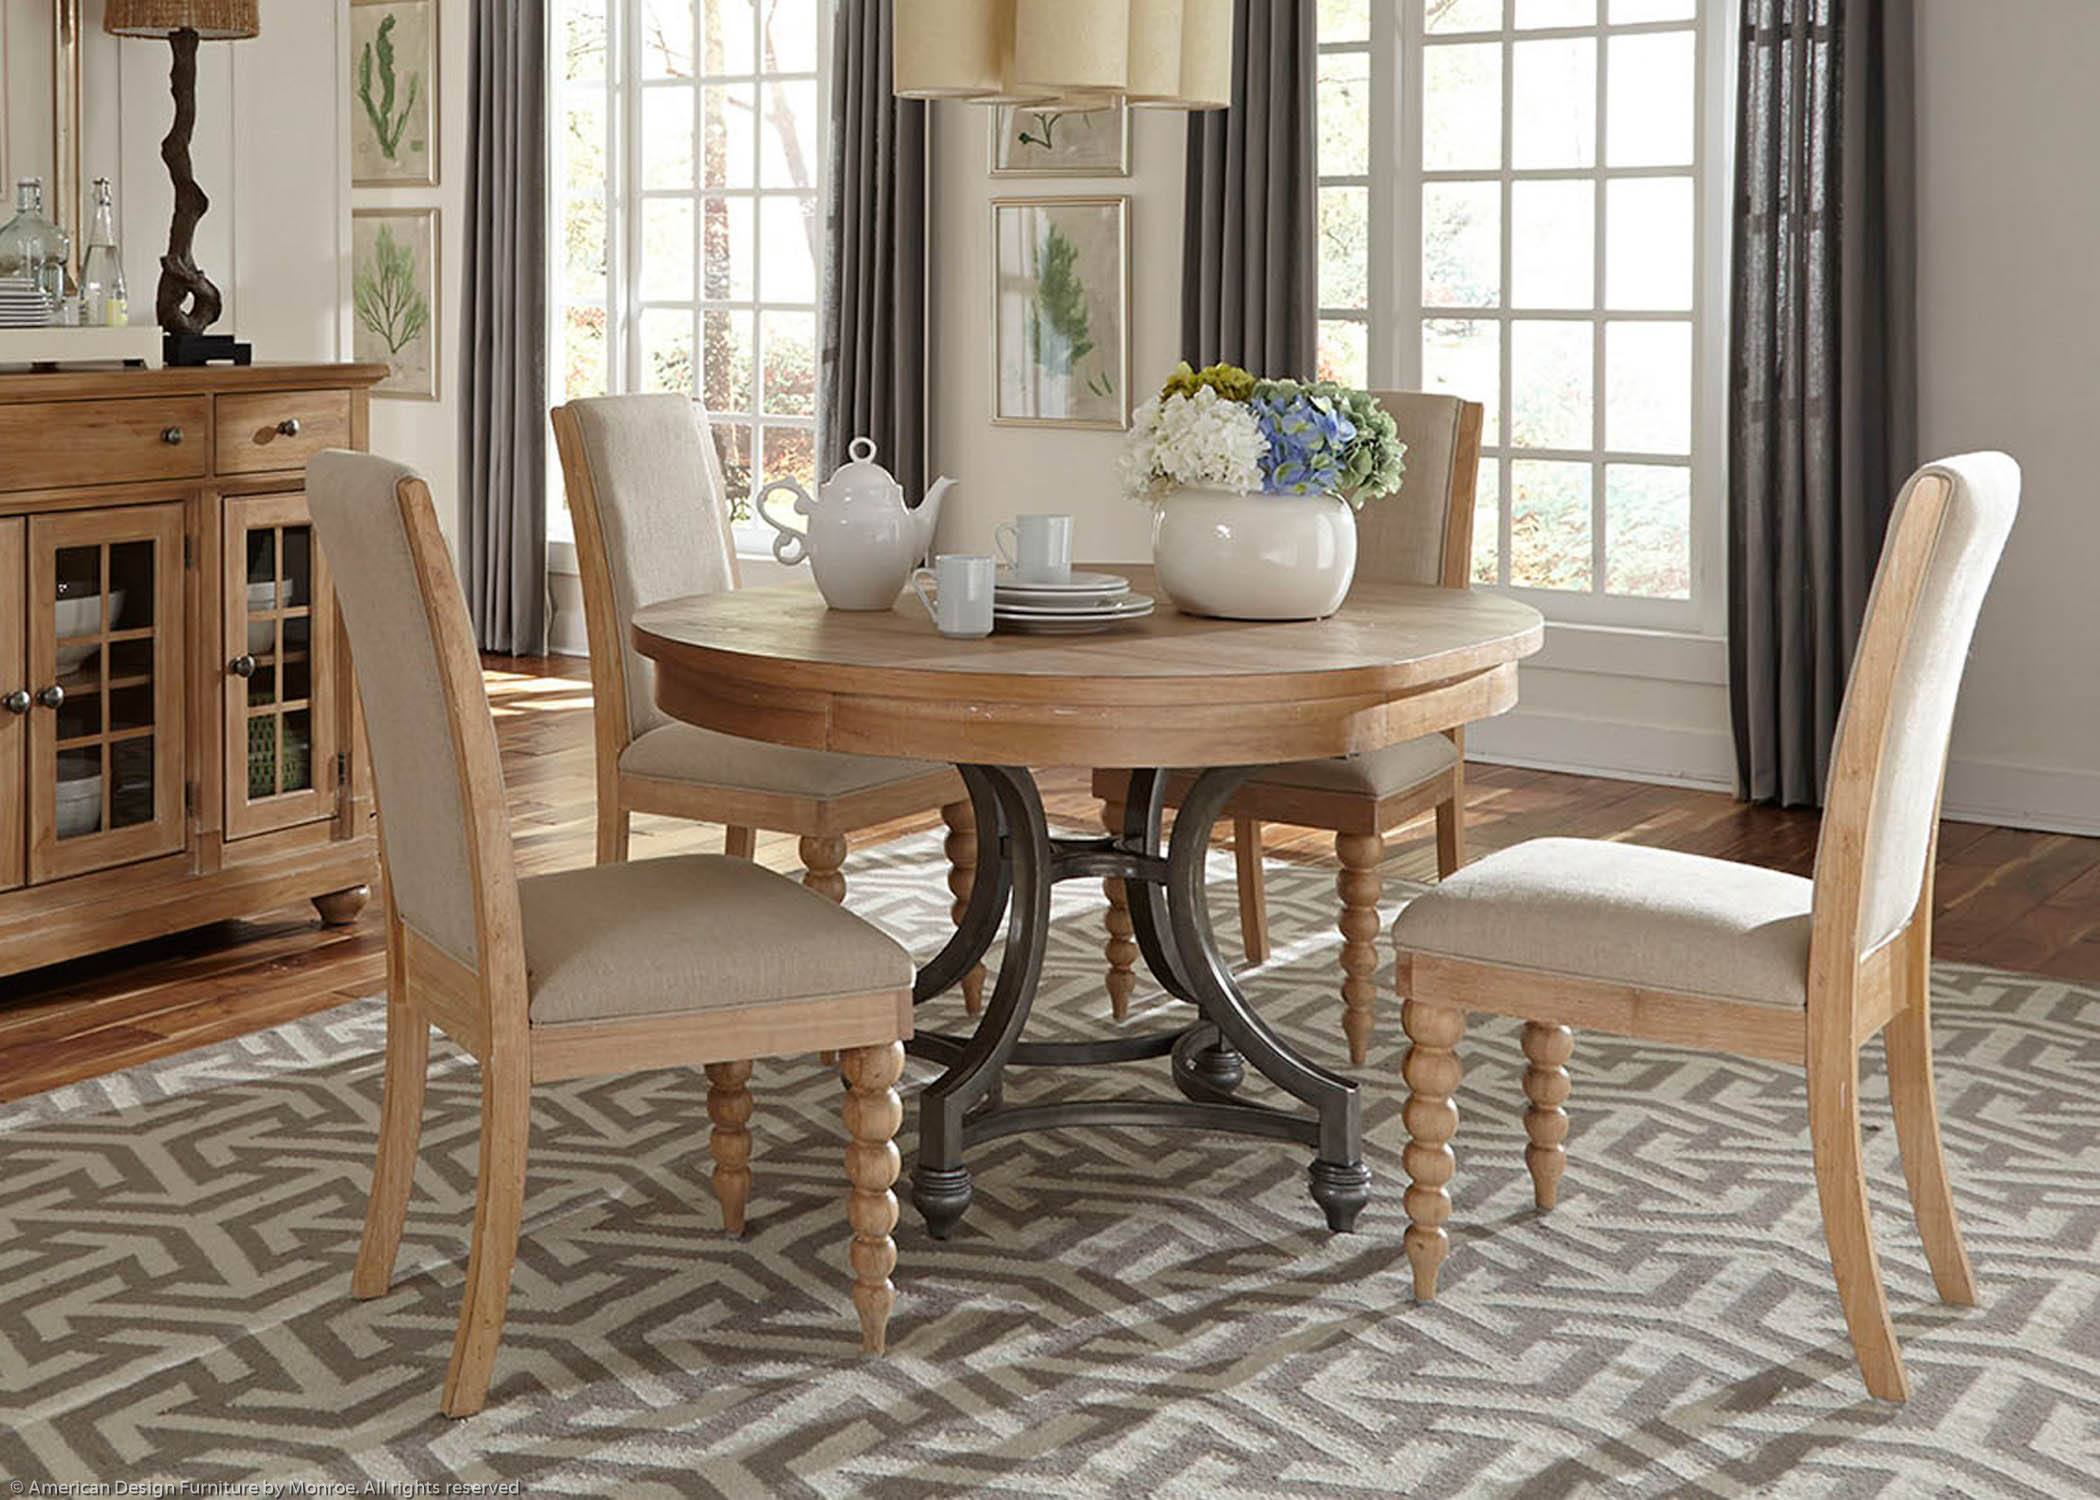 Chesapeake Casual Table Pic 1 (Heading Round Dining Table)